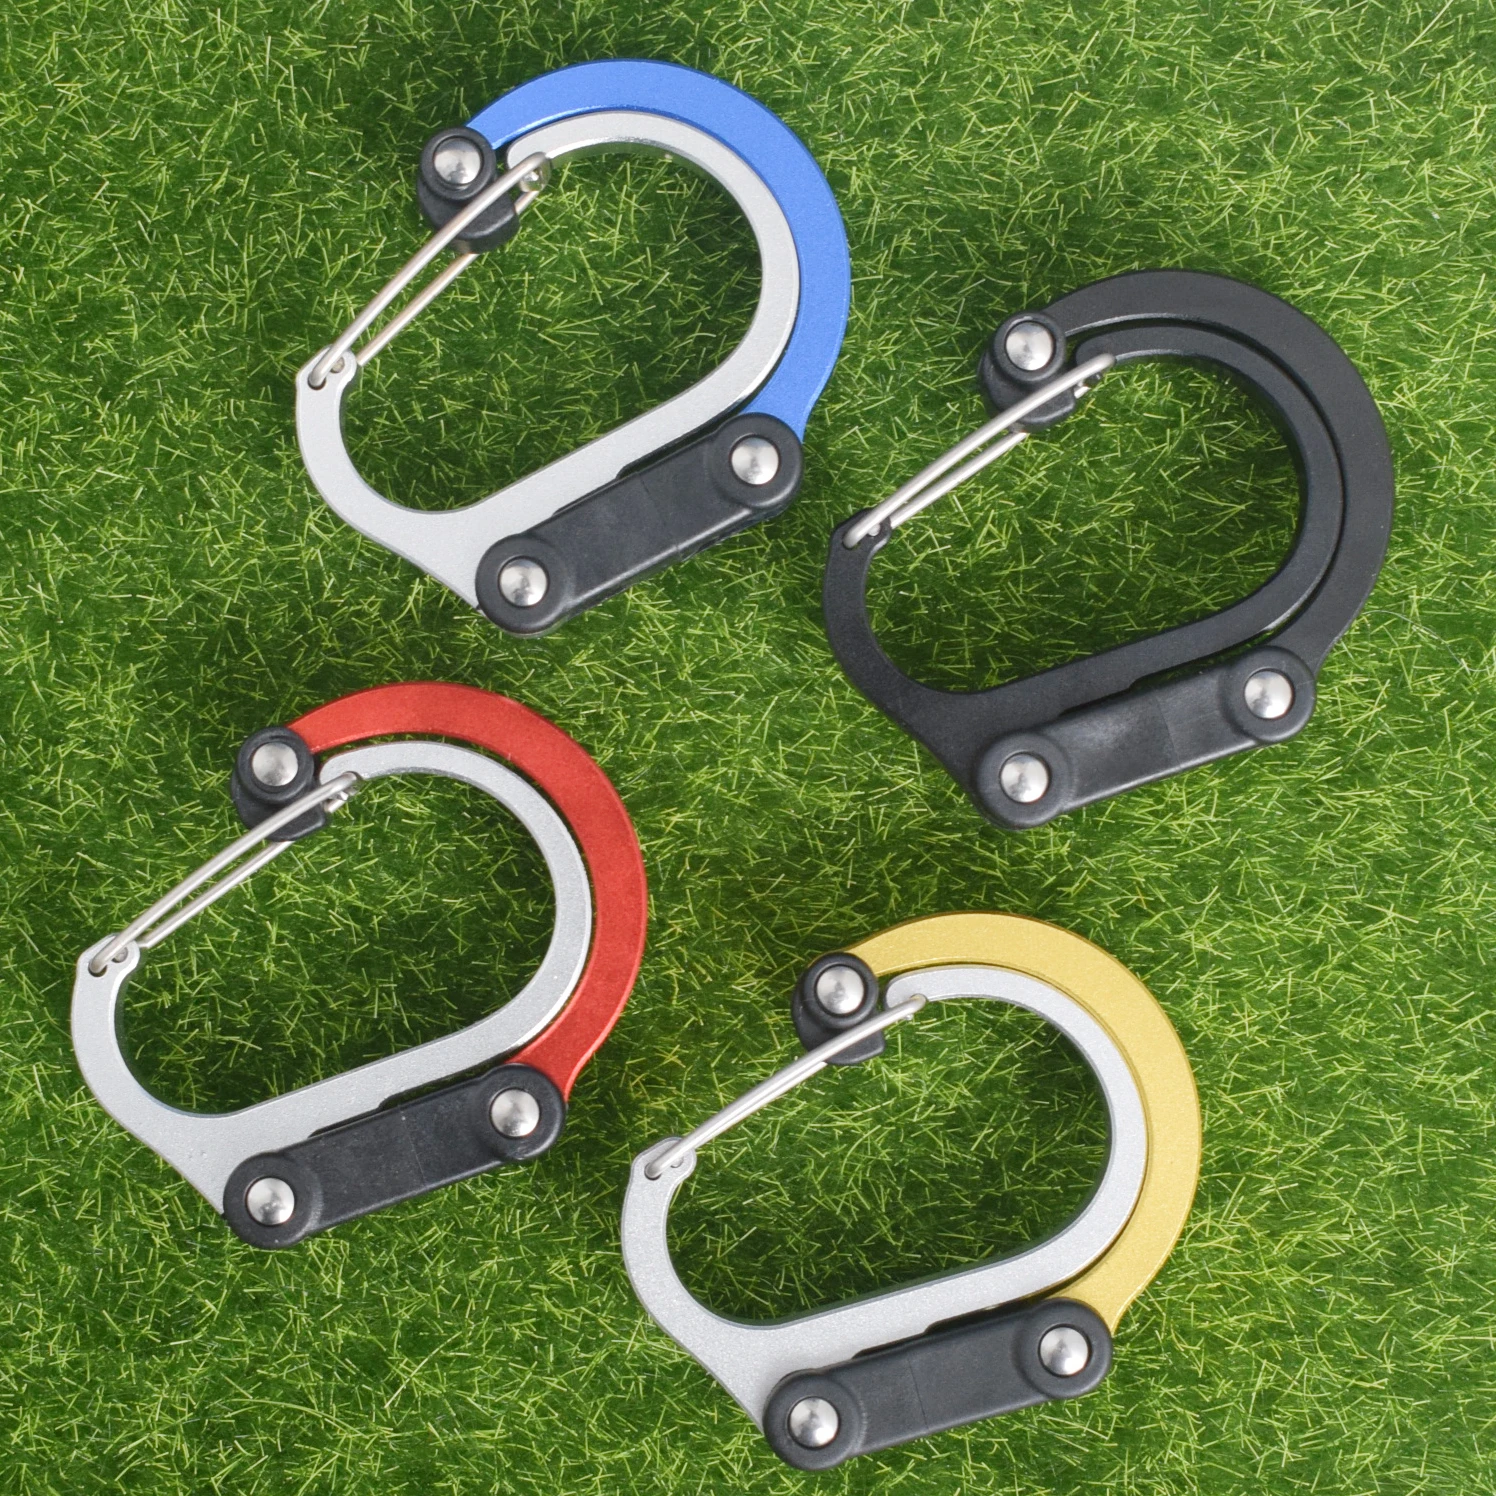 Hybrid Gear Clip - Carabiner Rotating Hook Clip Non-Locking Strong Clips for Camping Fishing Hiking Travel Backpack Out 2